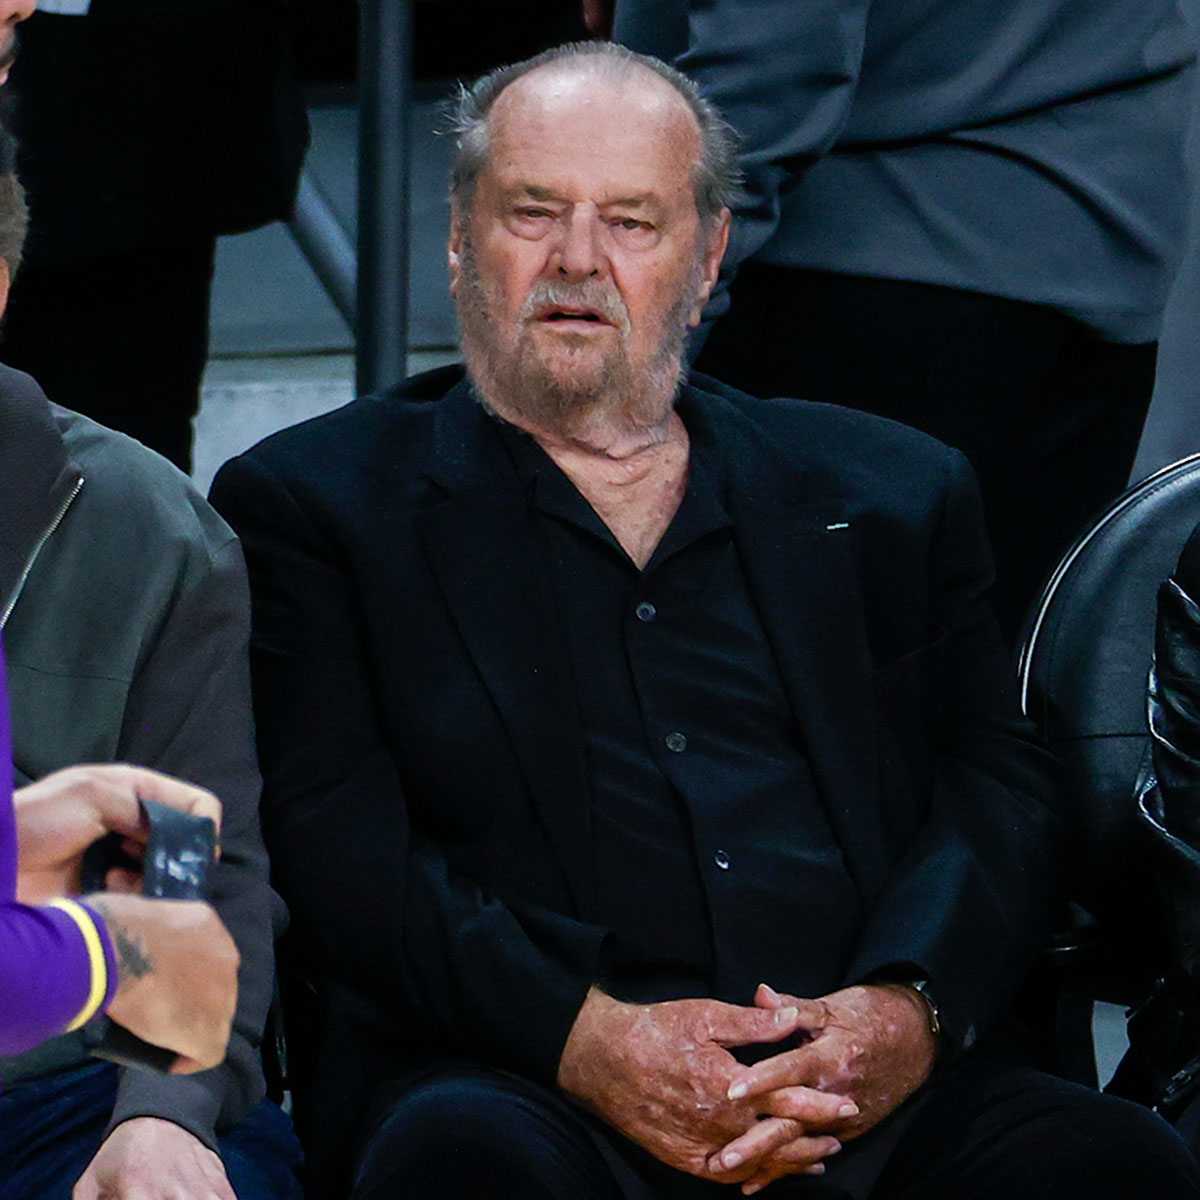 FEATURE-Jack-NicholsonVMakes-Rare-Public-Appearance-at-Lakers-Game-5.jpg